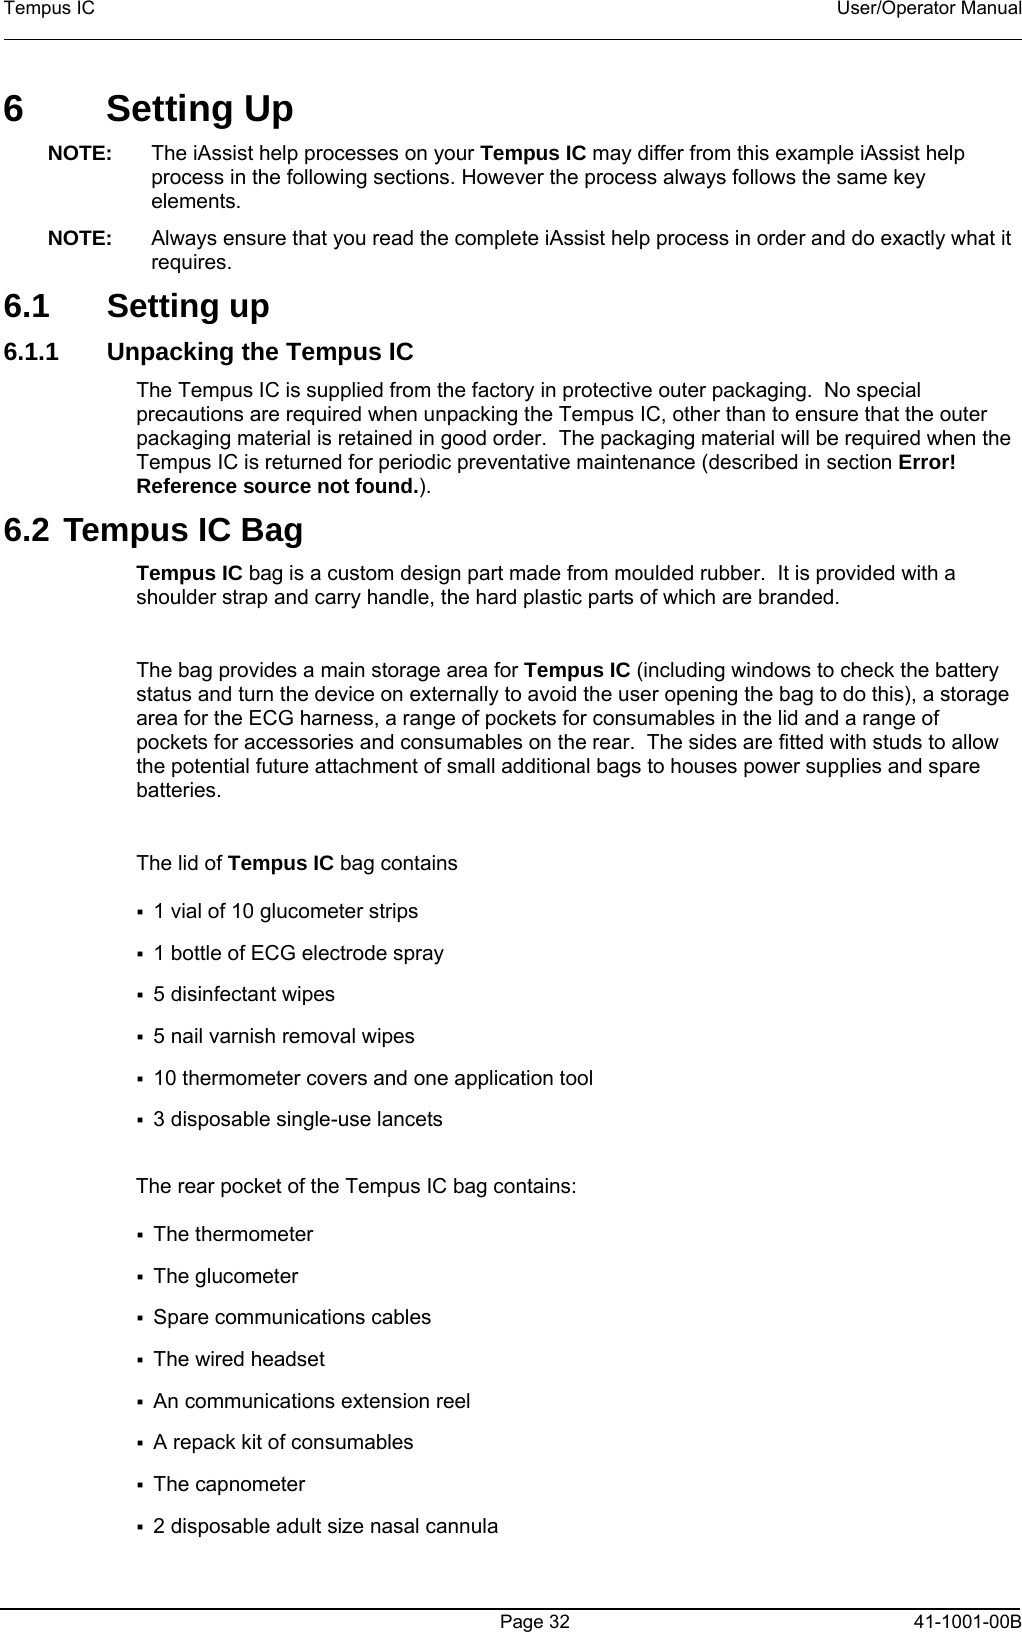 Tempus IC    User/Operator Manual      Page 32   41-1001-00B 6  Setting Up  NOTE:  The iAssist help processes on your Tempus IC may differ from this example iAssist help process in the following sections. However the process always follows the same key elements.   NOTE:  Always ensure that you read the complete iAssist help process in order and do exactly what it requires.  6.1 Setting up 6.1.1  Unpacking the Tempus IC The Tempus IC is supplied from the factory in protective outer packaging.  No special precautions are required when unpacking the Tempus IC, other than to ensure that the outer packaging material is retained in good order.  The packaging material will be required when the Tempus IC is returned for periodic preventative maintenance (described in section Error! Reference source not found.).   6.2 Tempus IC Bag Tempus IC bag is a custom design part made from moulded rubber.  It is provided with a shoulder strap and carry handle, the hard plastic parts of which are branded.  The bag provides a main storage area for Tempus IC (including windows to check the battery status and turn the device on externally to avoid the user opening the bag to do this), a storage area for the ECG harness, a range of pockets for consumables in the lid and a range of pockets for accessories and consumables on the rear.  The sides are fitted with studs to allow the potential future attachment of small additional bags to houses power supplies and spare batteries.  The lid of Tempus IC bag contains   1 vial of 10 glucometer strips  1 bottle of ECG electrode spray  5 disinfectant wipes  5 nail varnish removal wipes  10 thermometer covers and one application tool  3 disposable single-use lancets  The rear pocket of the Tempus IC bag contains:  The thermometer  The glucometer  Spare communications cables  The wired headset  An communications extension reel  A repack kit of consumables  The capnometer  2 disposable adult size nasal cannula   